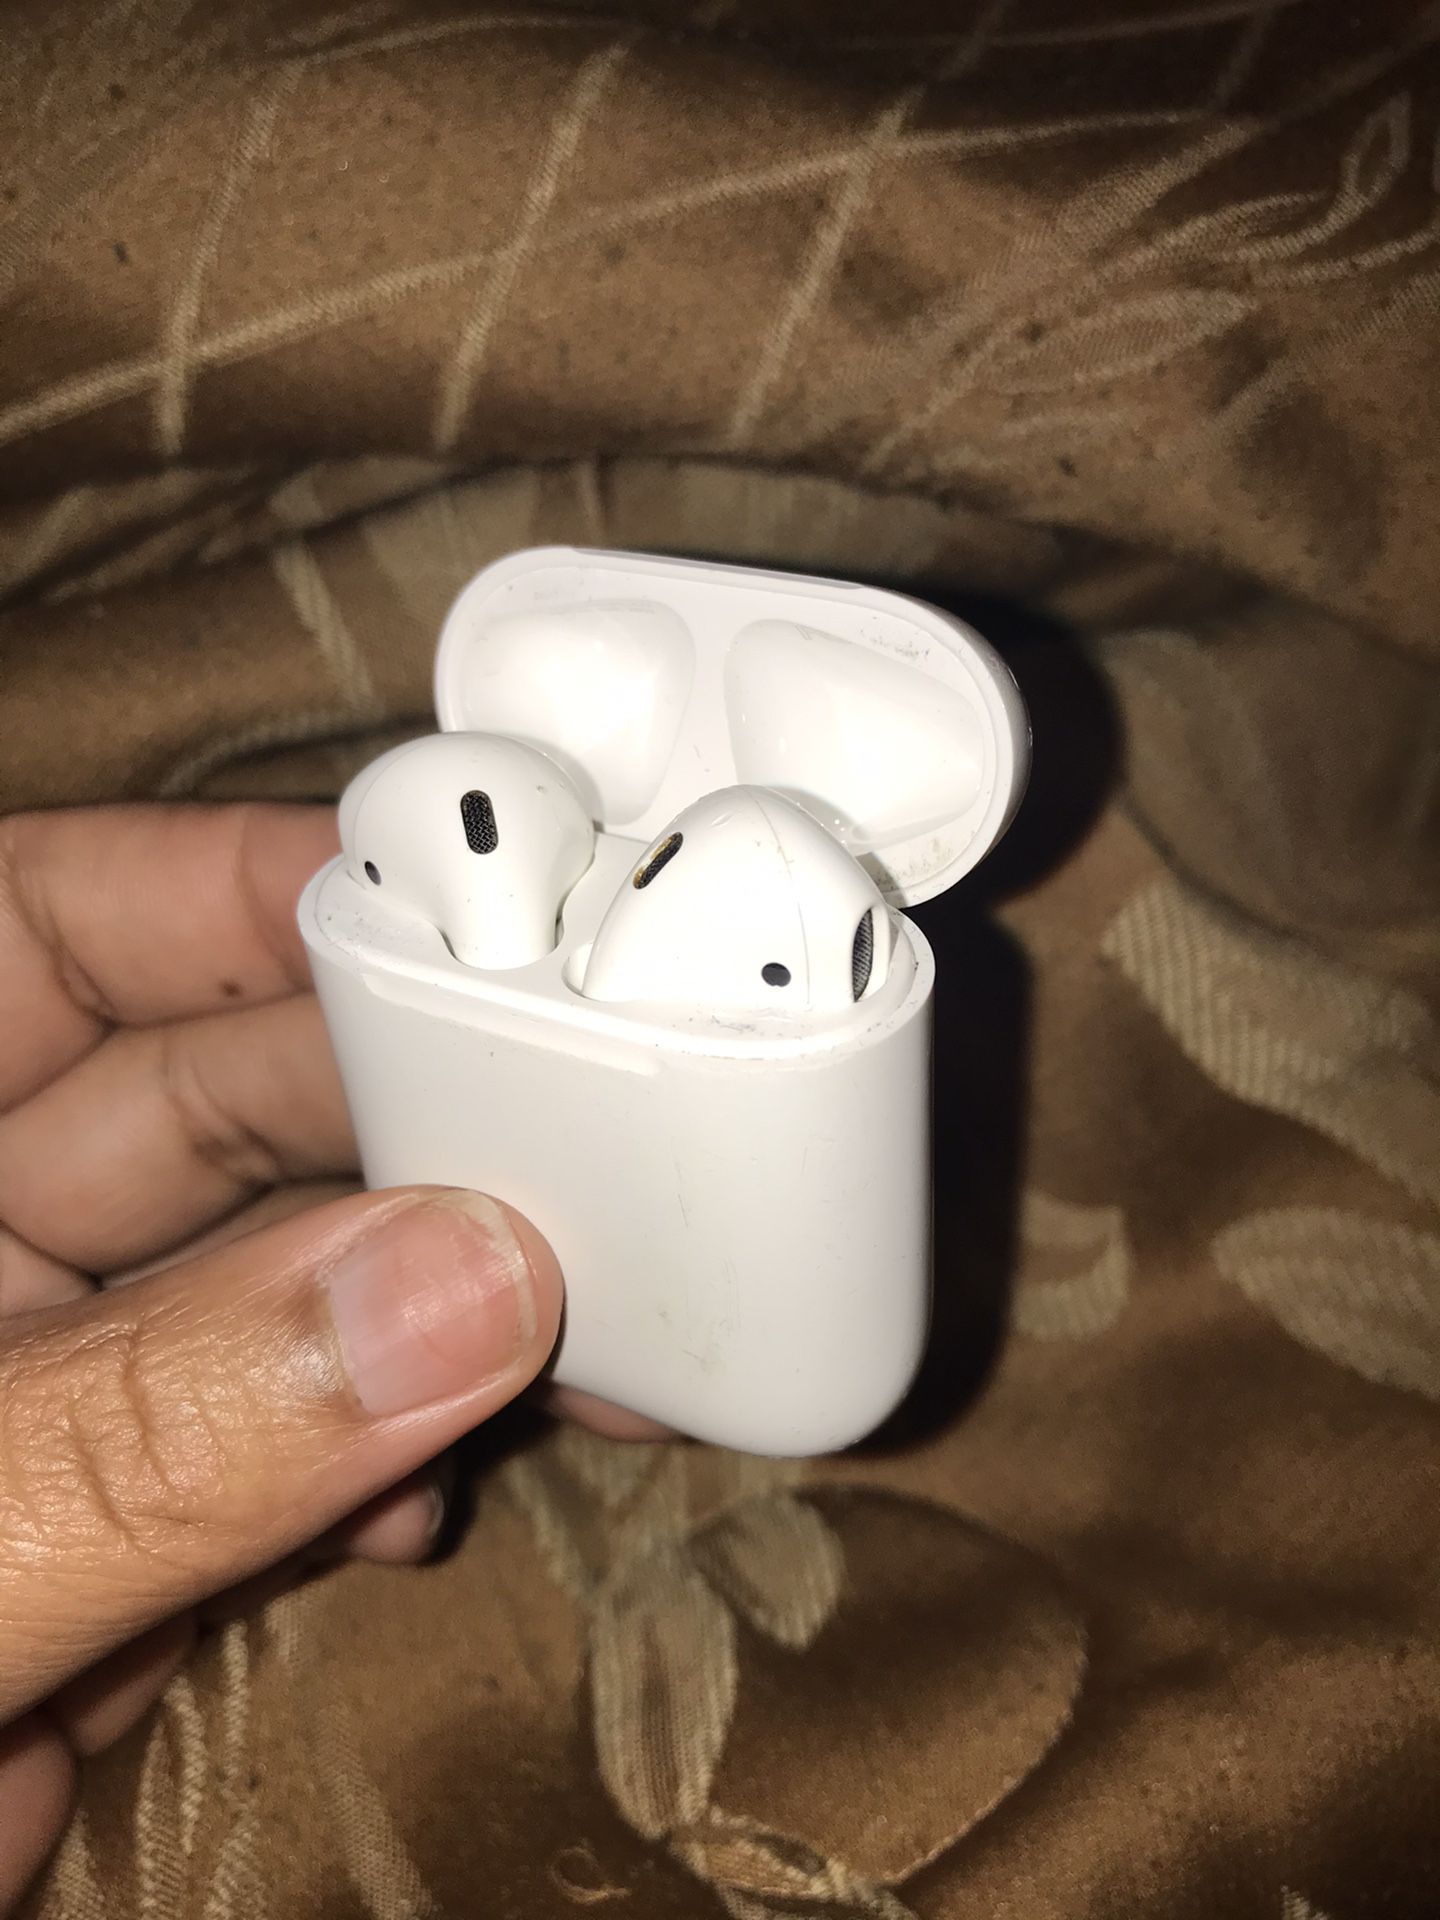 **++* SECOND GENERATION**+ APPLE AIRPODS ++ SELLING FOR PARTS